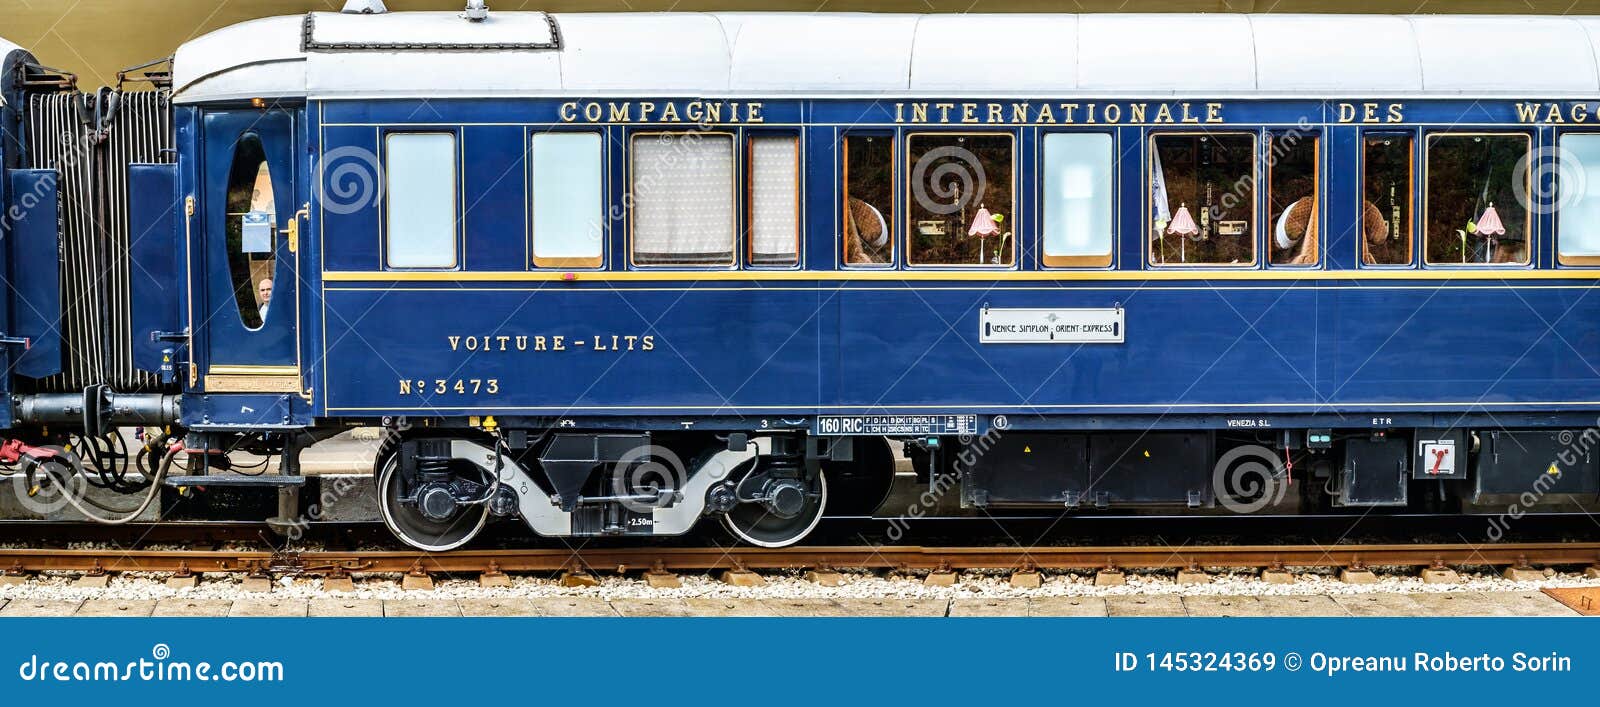 The Orient Express editorial stock image. Image of franz - 145324369